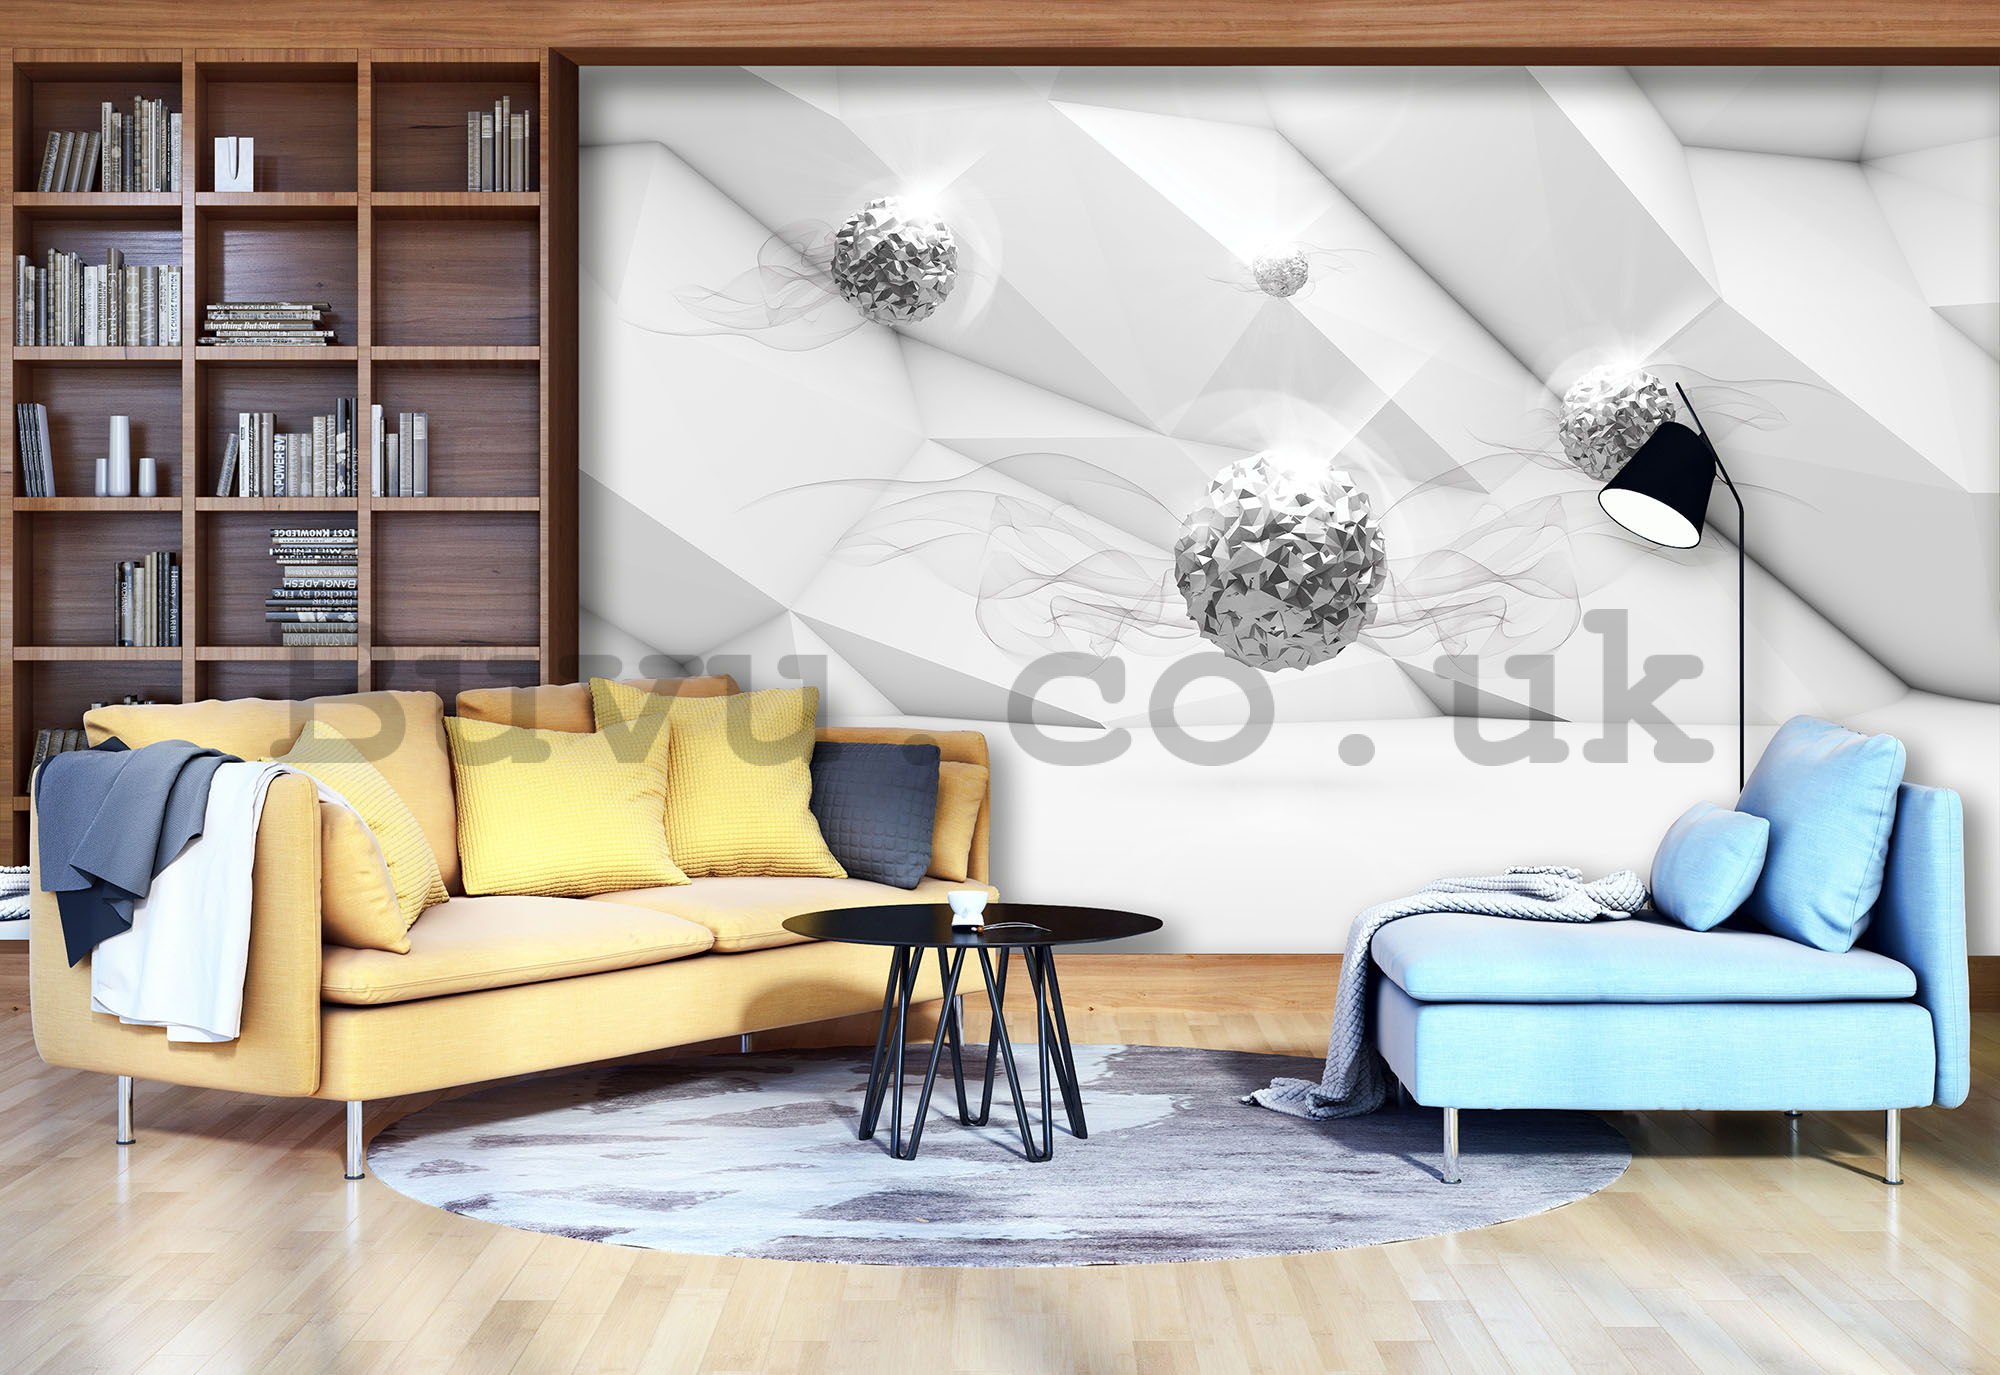 Wall mural: Spherical Abstraction (1) - 254x368 cm